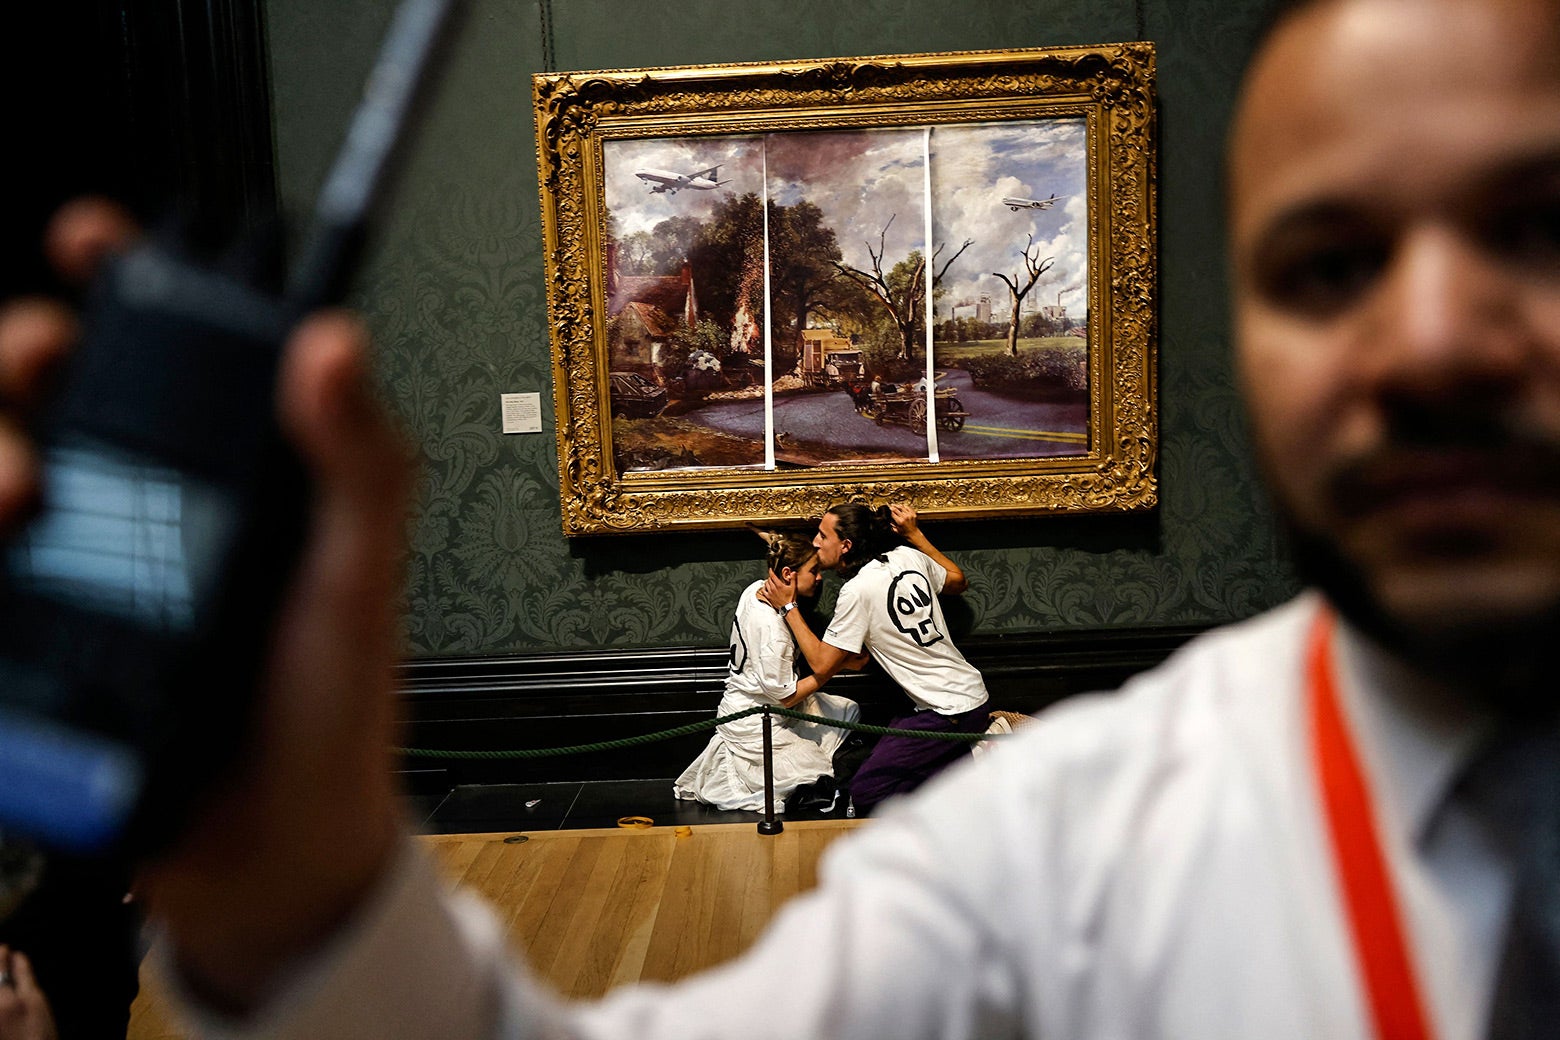 Activists from the 'Just Stop Oil' campaign group, with hands glued to the frame of the painting 'The Hay Wain' by English artist John Constable. A security guard tries to block the photo.